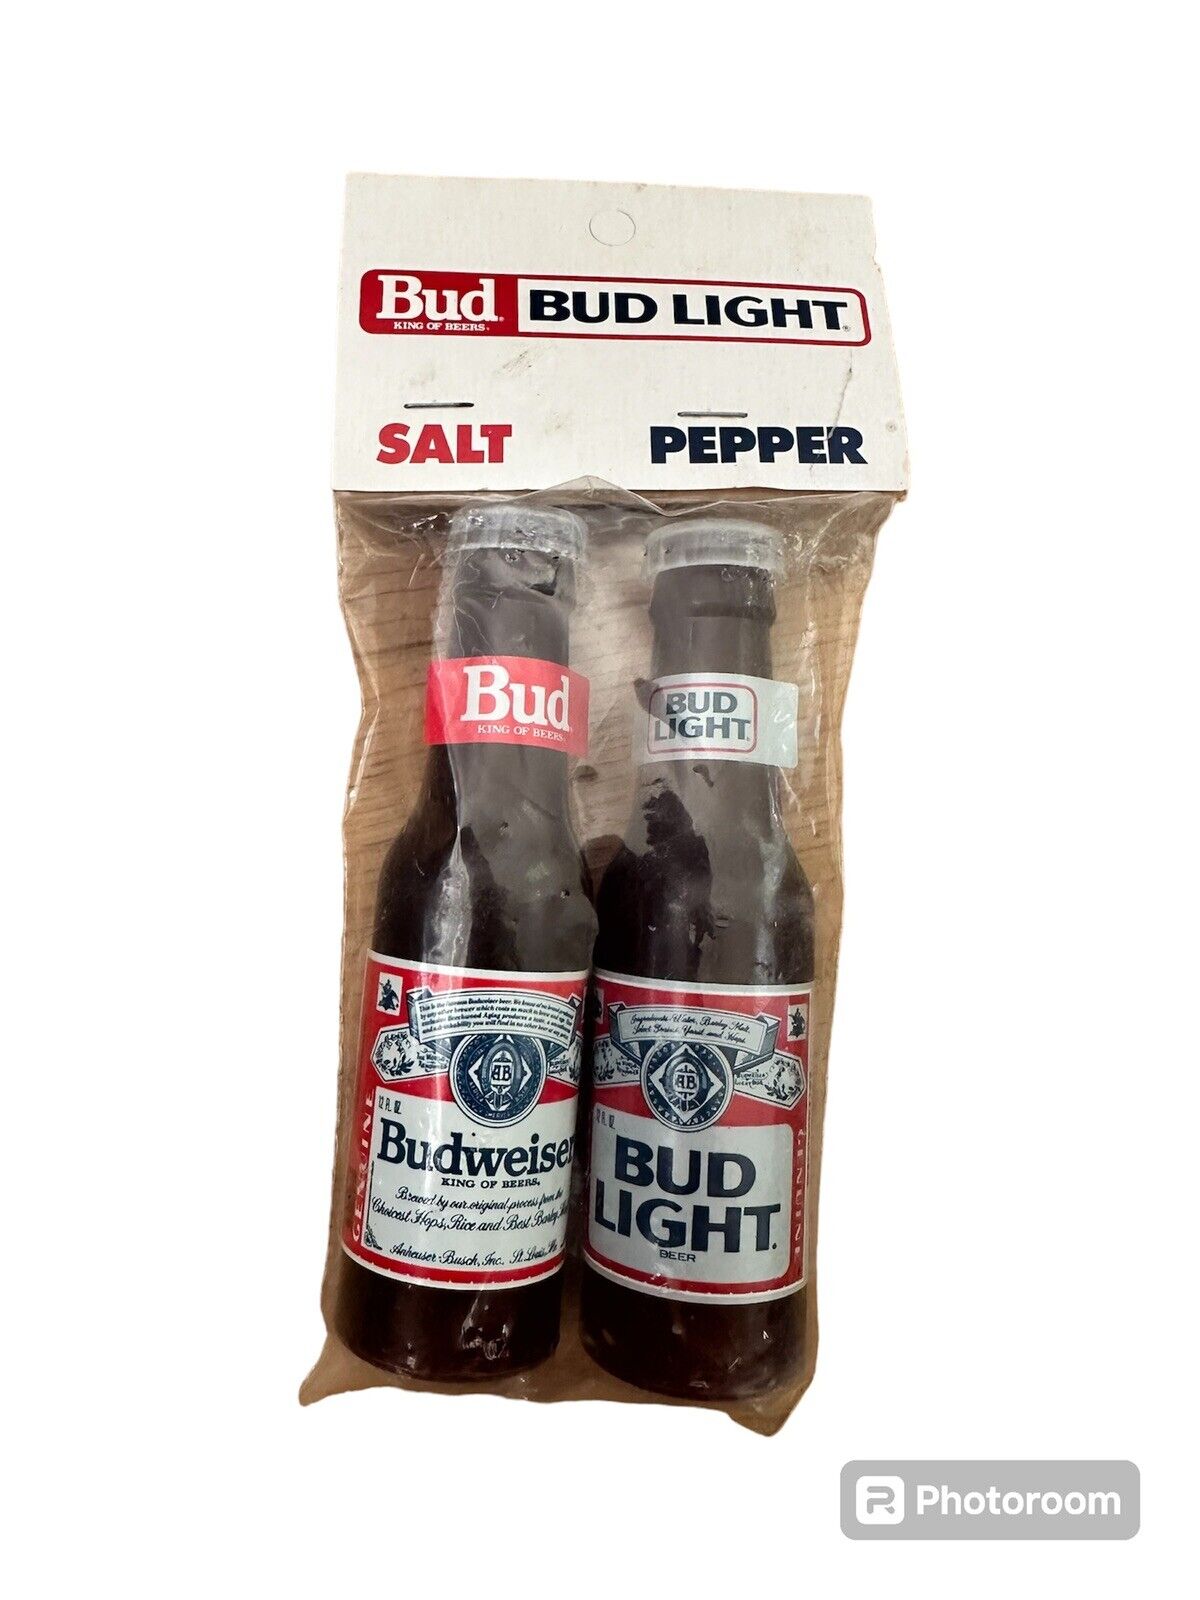 Vintage Budweiser Bud Light Salt And Pepper Shakers Set New in Package